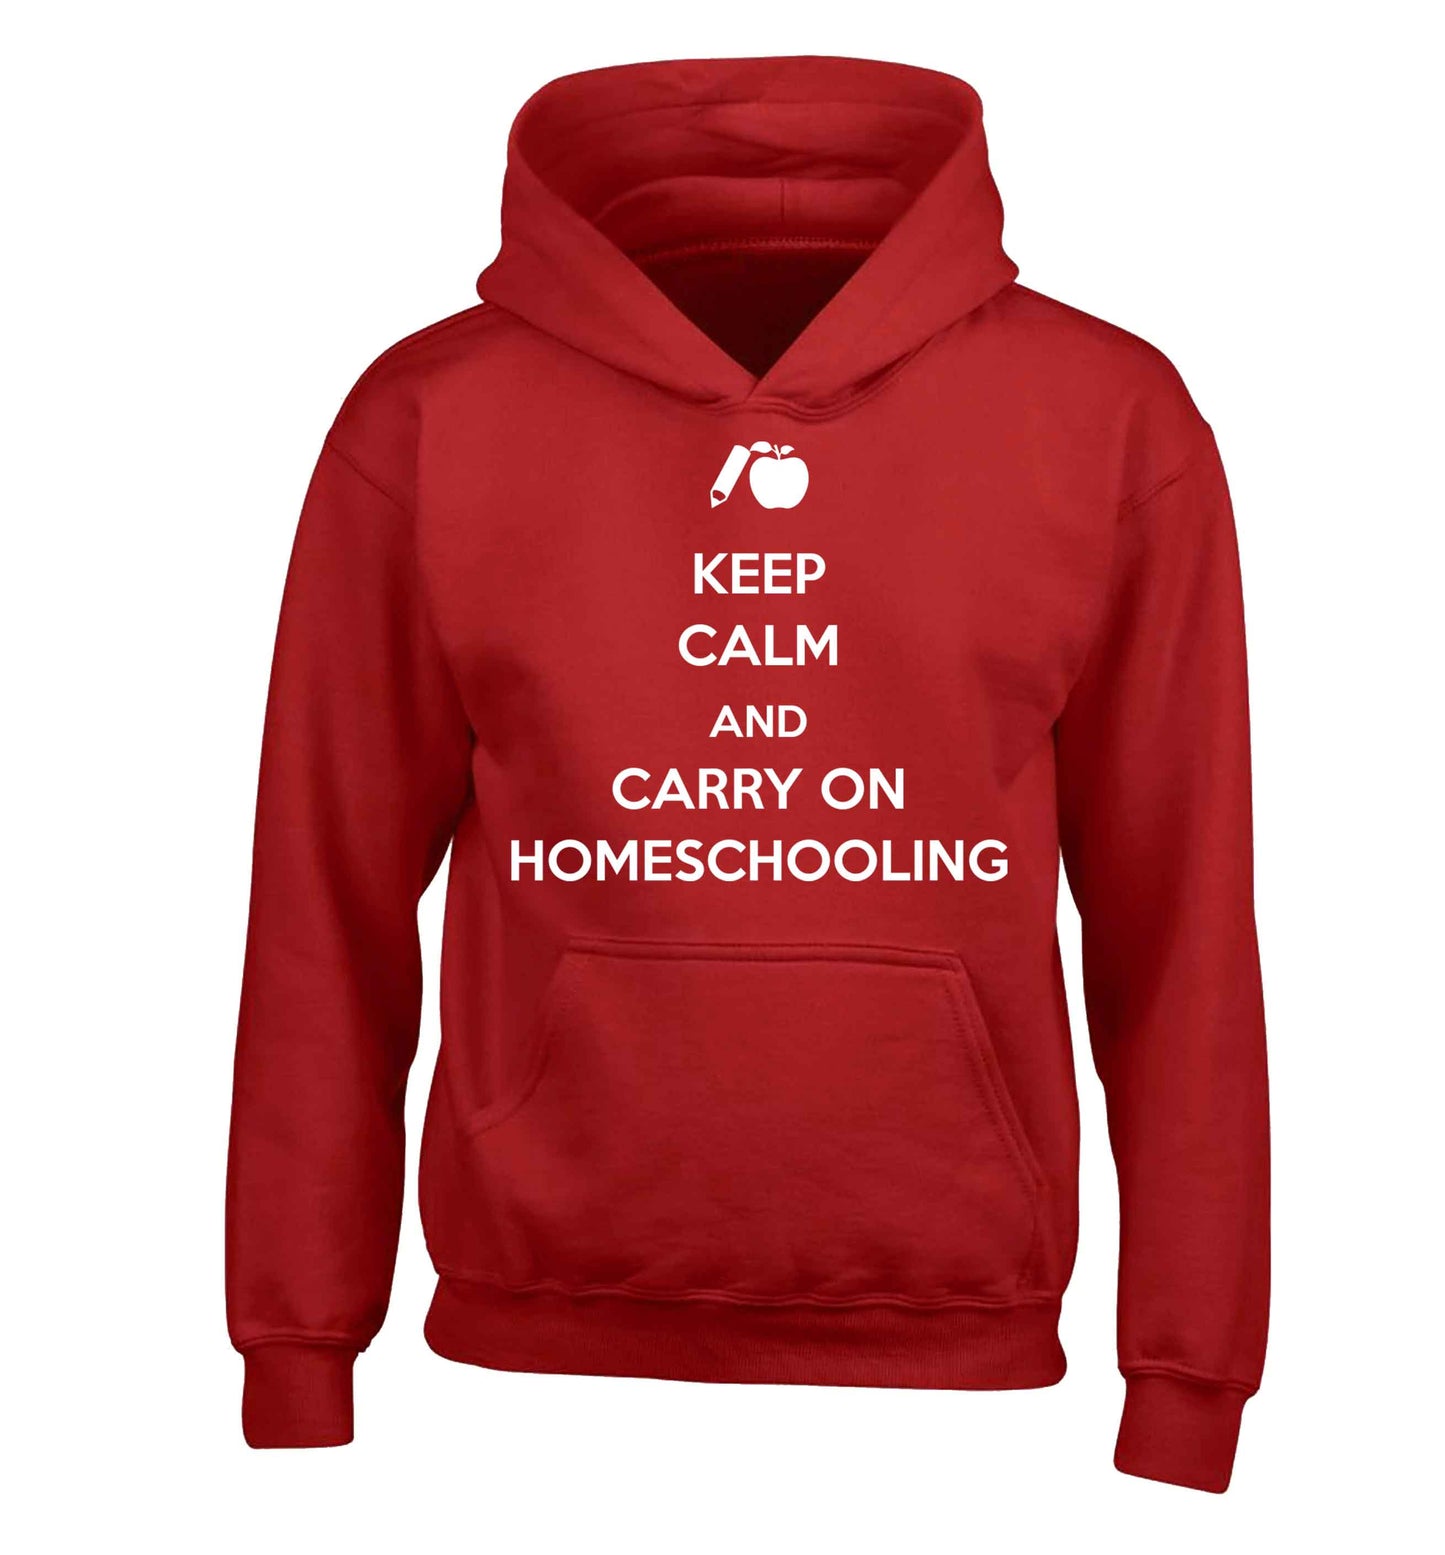 Keep calm and carry on homeschooling children's red hoodie 12-13 Years